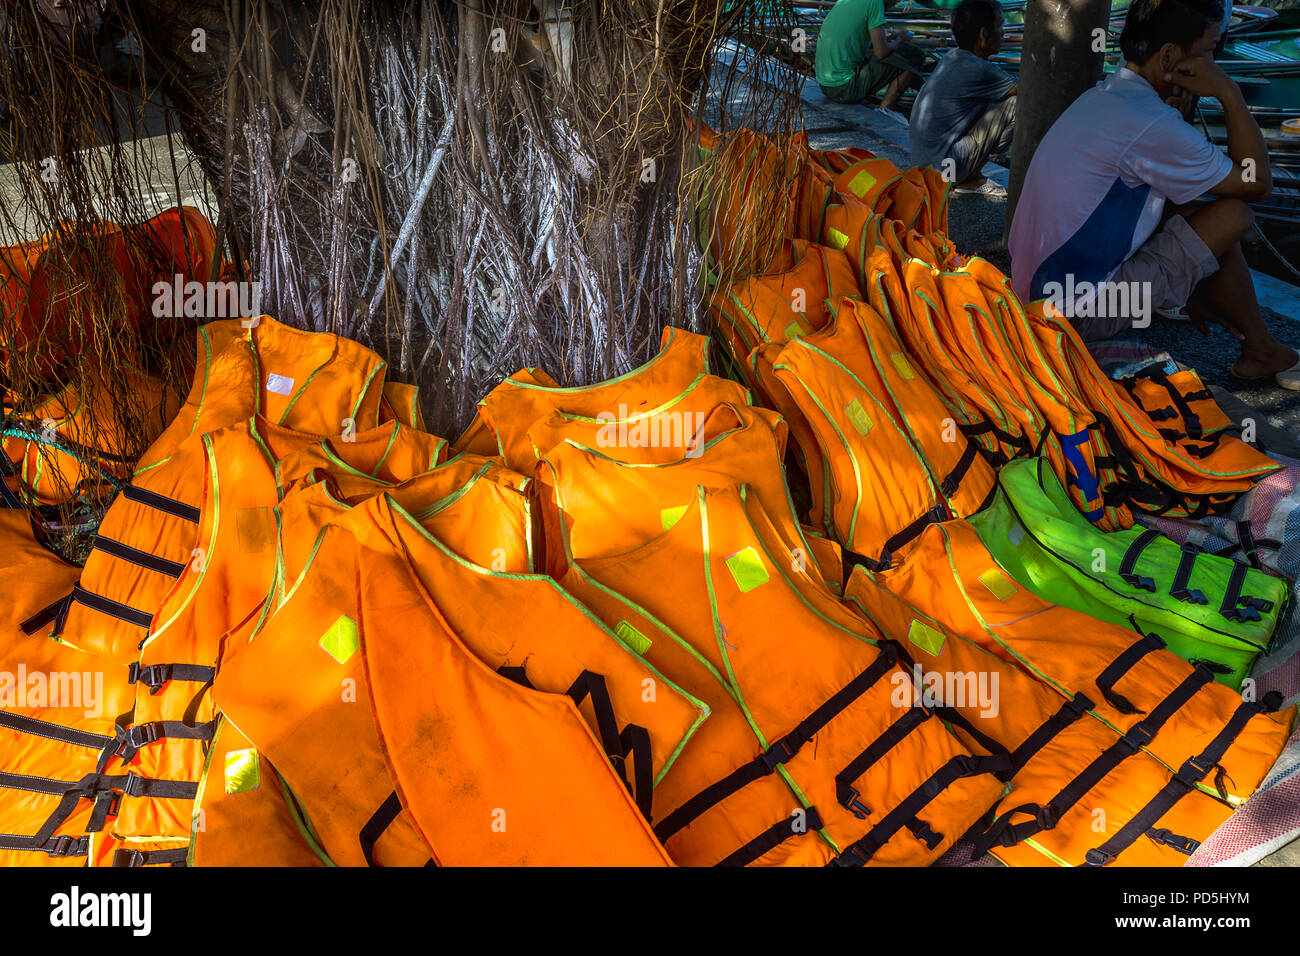 A group of orange lifejackets leaning against a tree at Tam Coc, Vietnam. Stock Photo